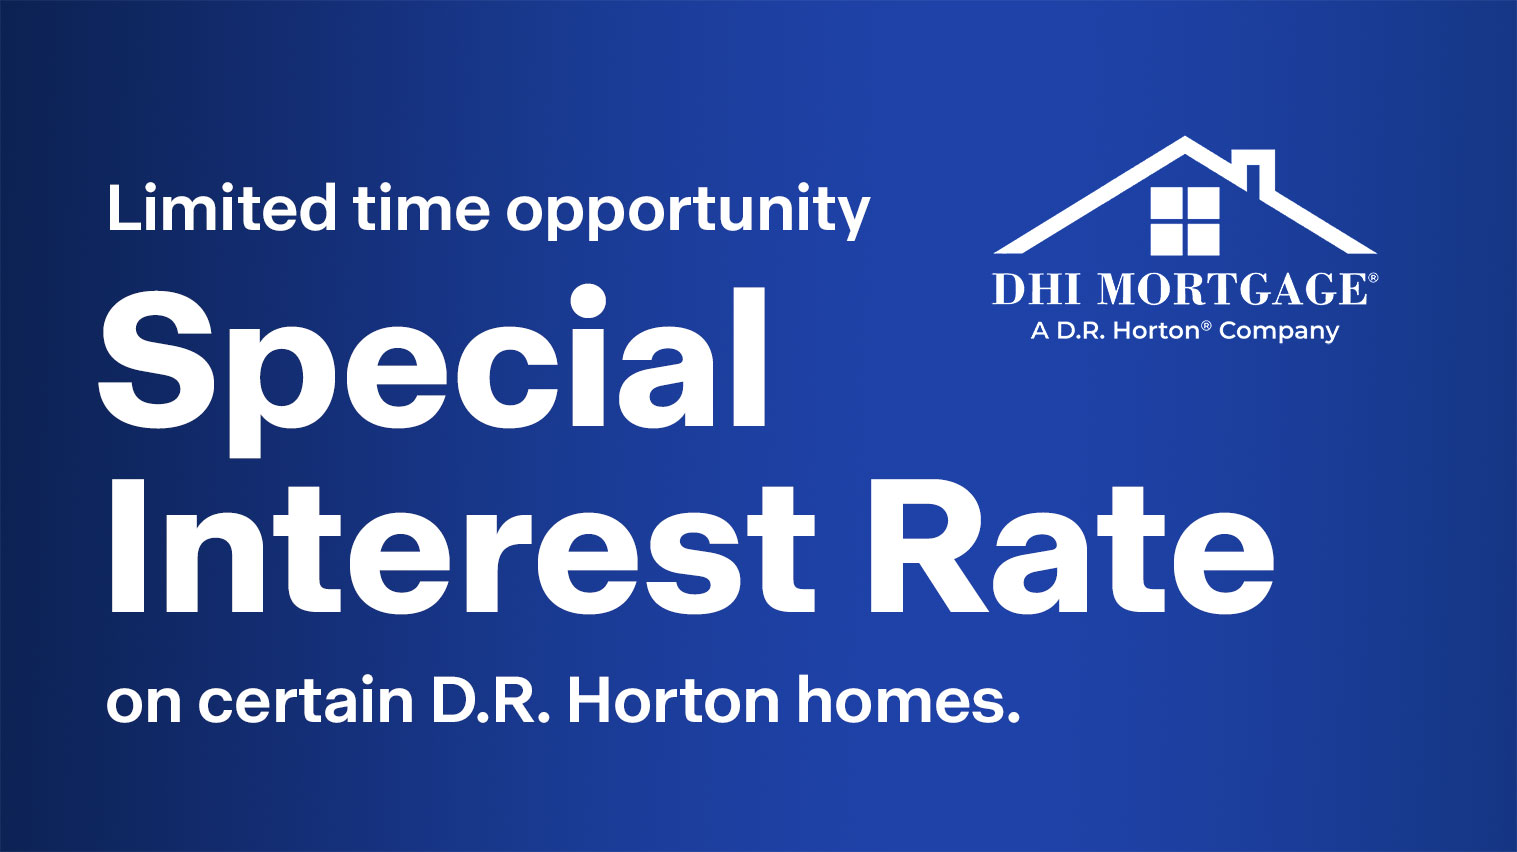 Limited time opportunity. Special interest rate on certain D.R. Horton homes. Blue background. DHI Mortgage logo.